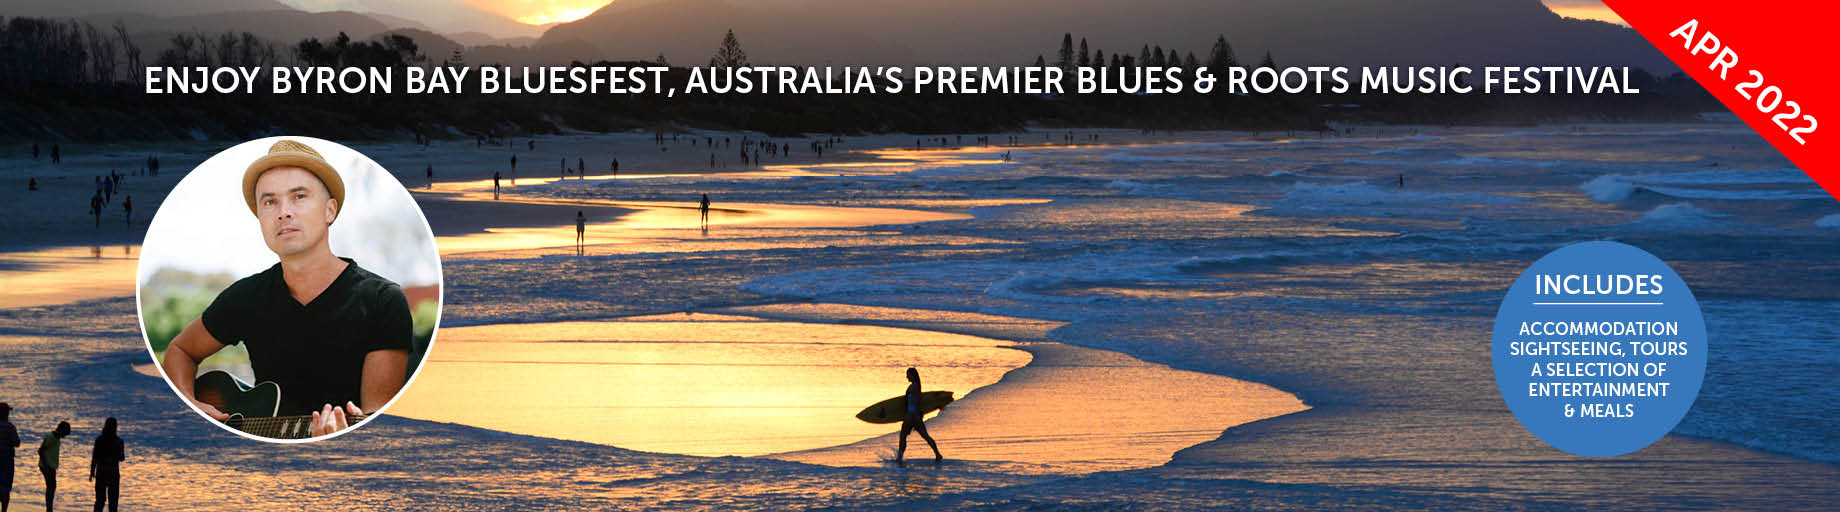 Byron Bay Bluesfest and Queensland Discovery Tour